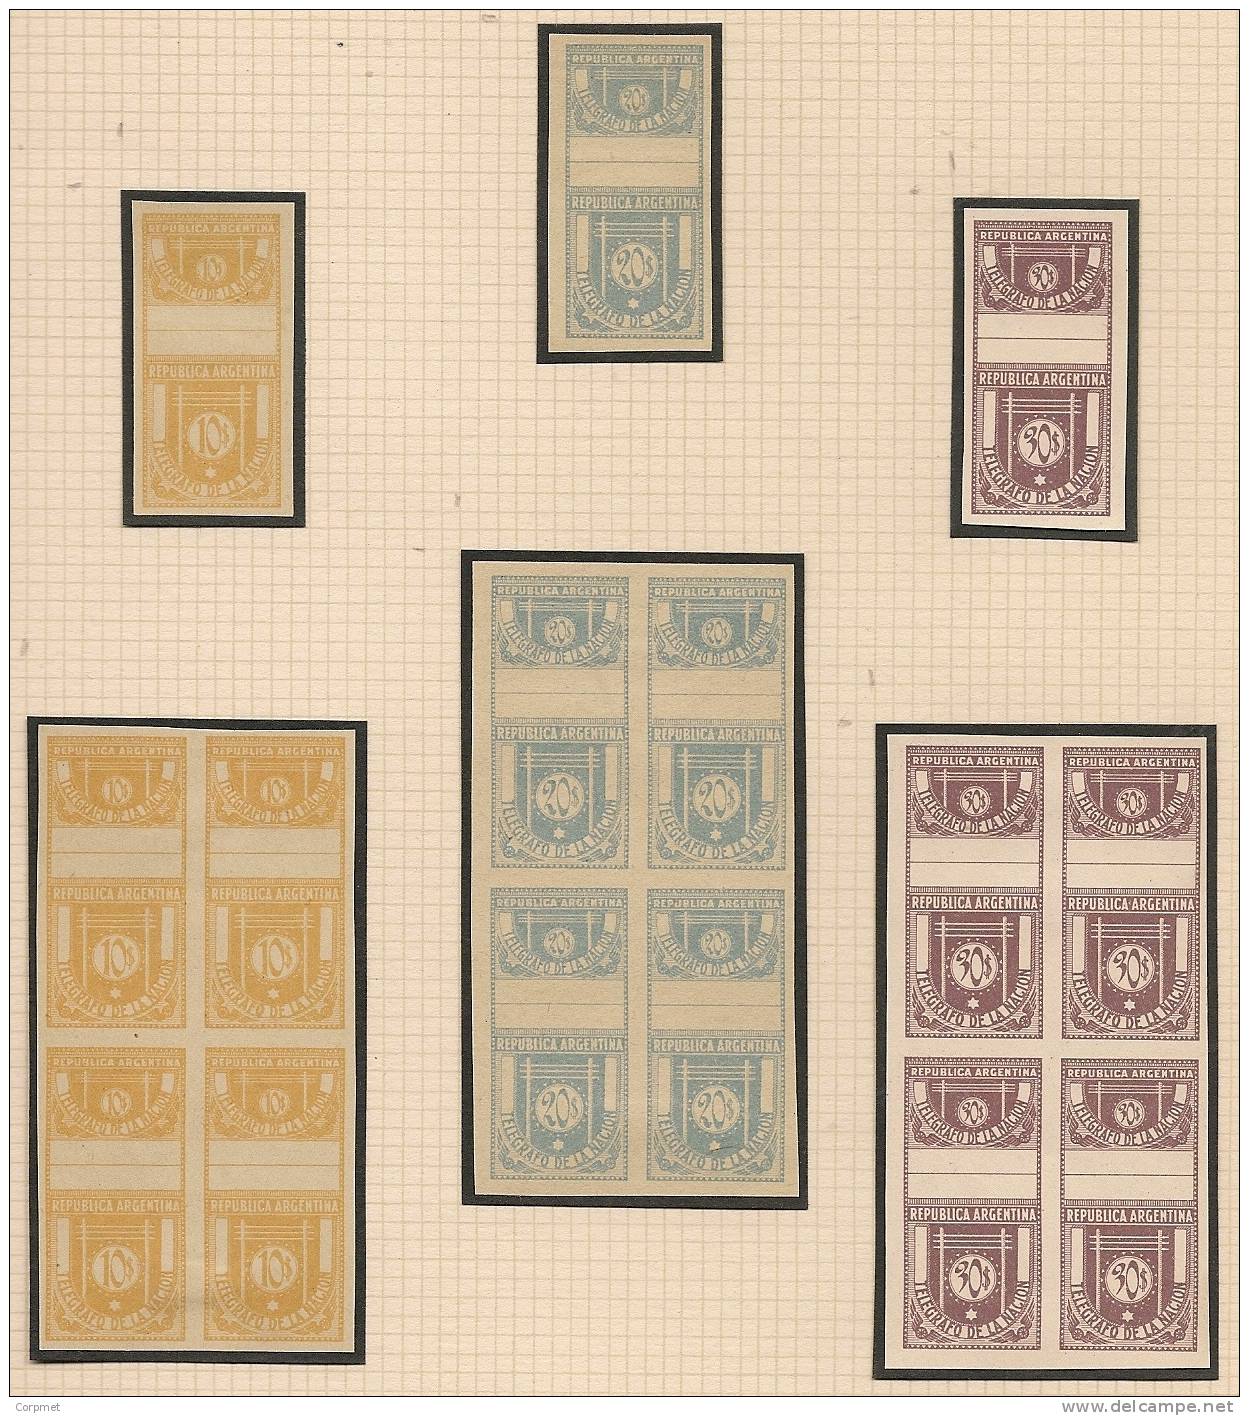 TELEGRAPH STAMPS -ARGENTINA 1930 COMPLETE SET of 32 values -IMPERFORATE ESSAYS in the same colors -SINGLE and BLOCK OF 4